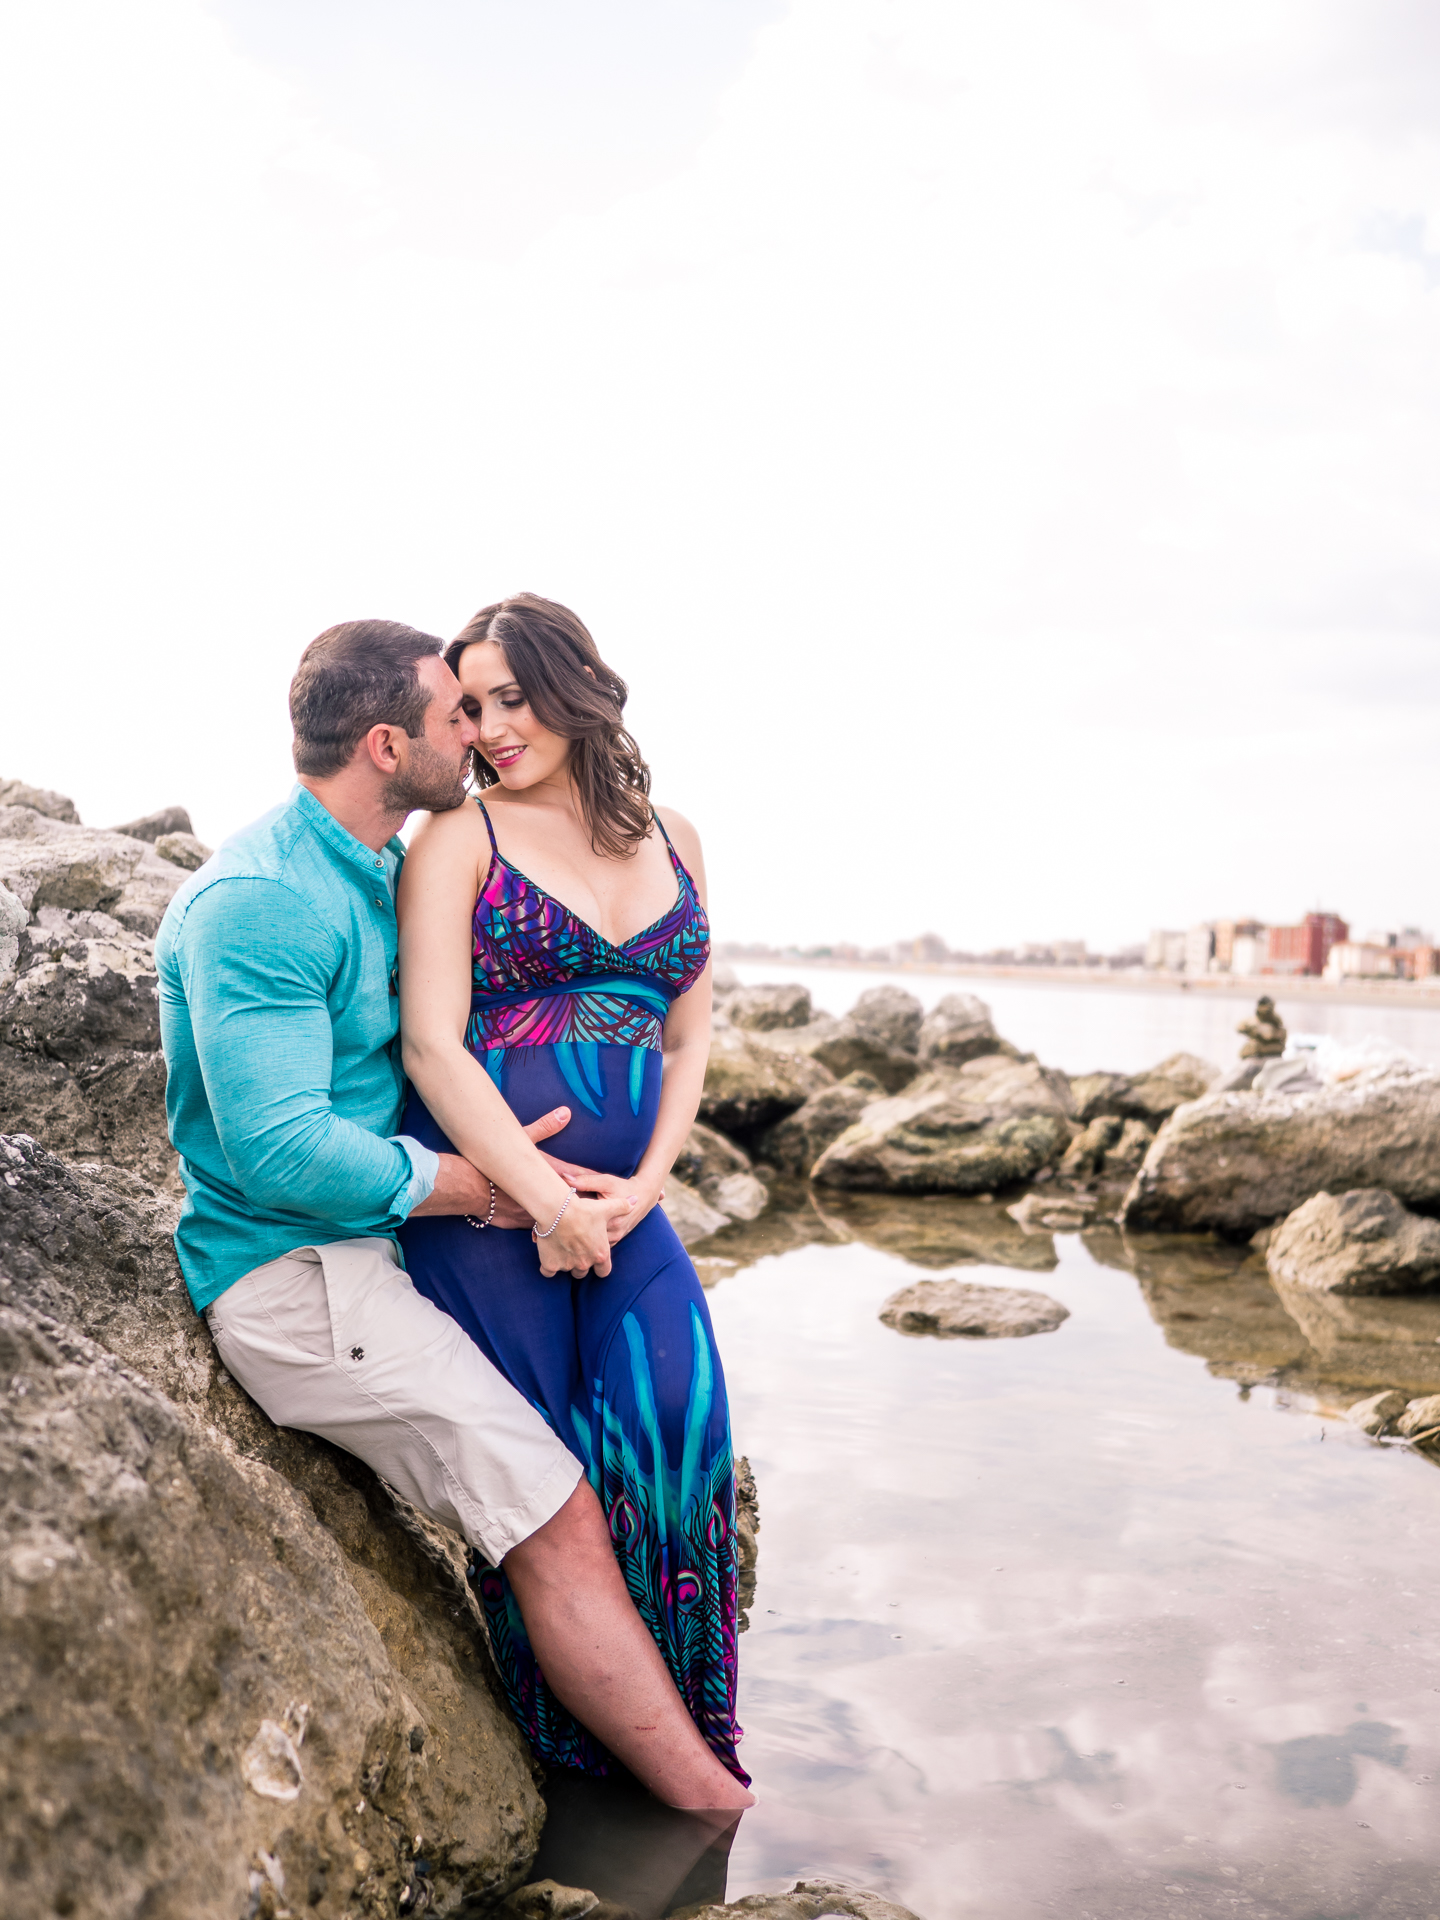 ﻿Maternity photo session photographer in Italy